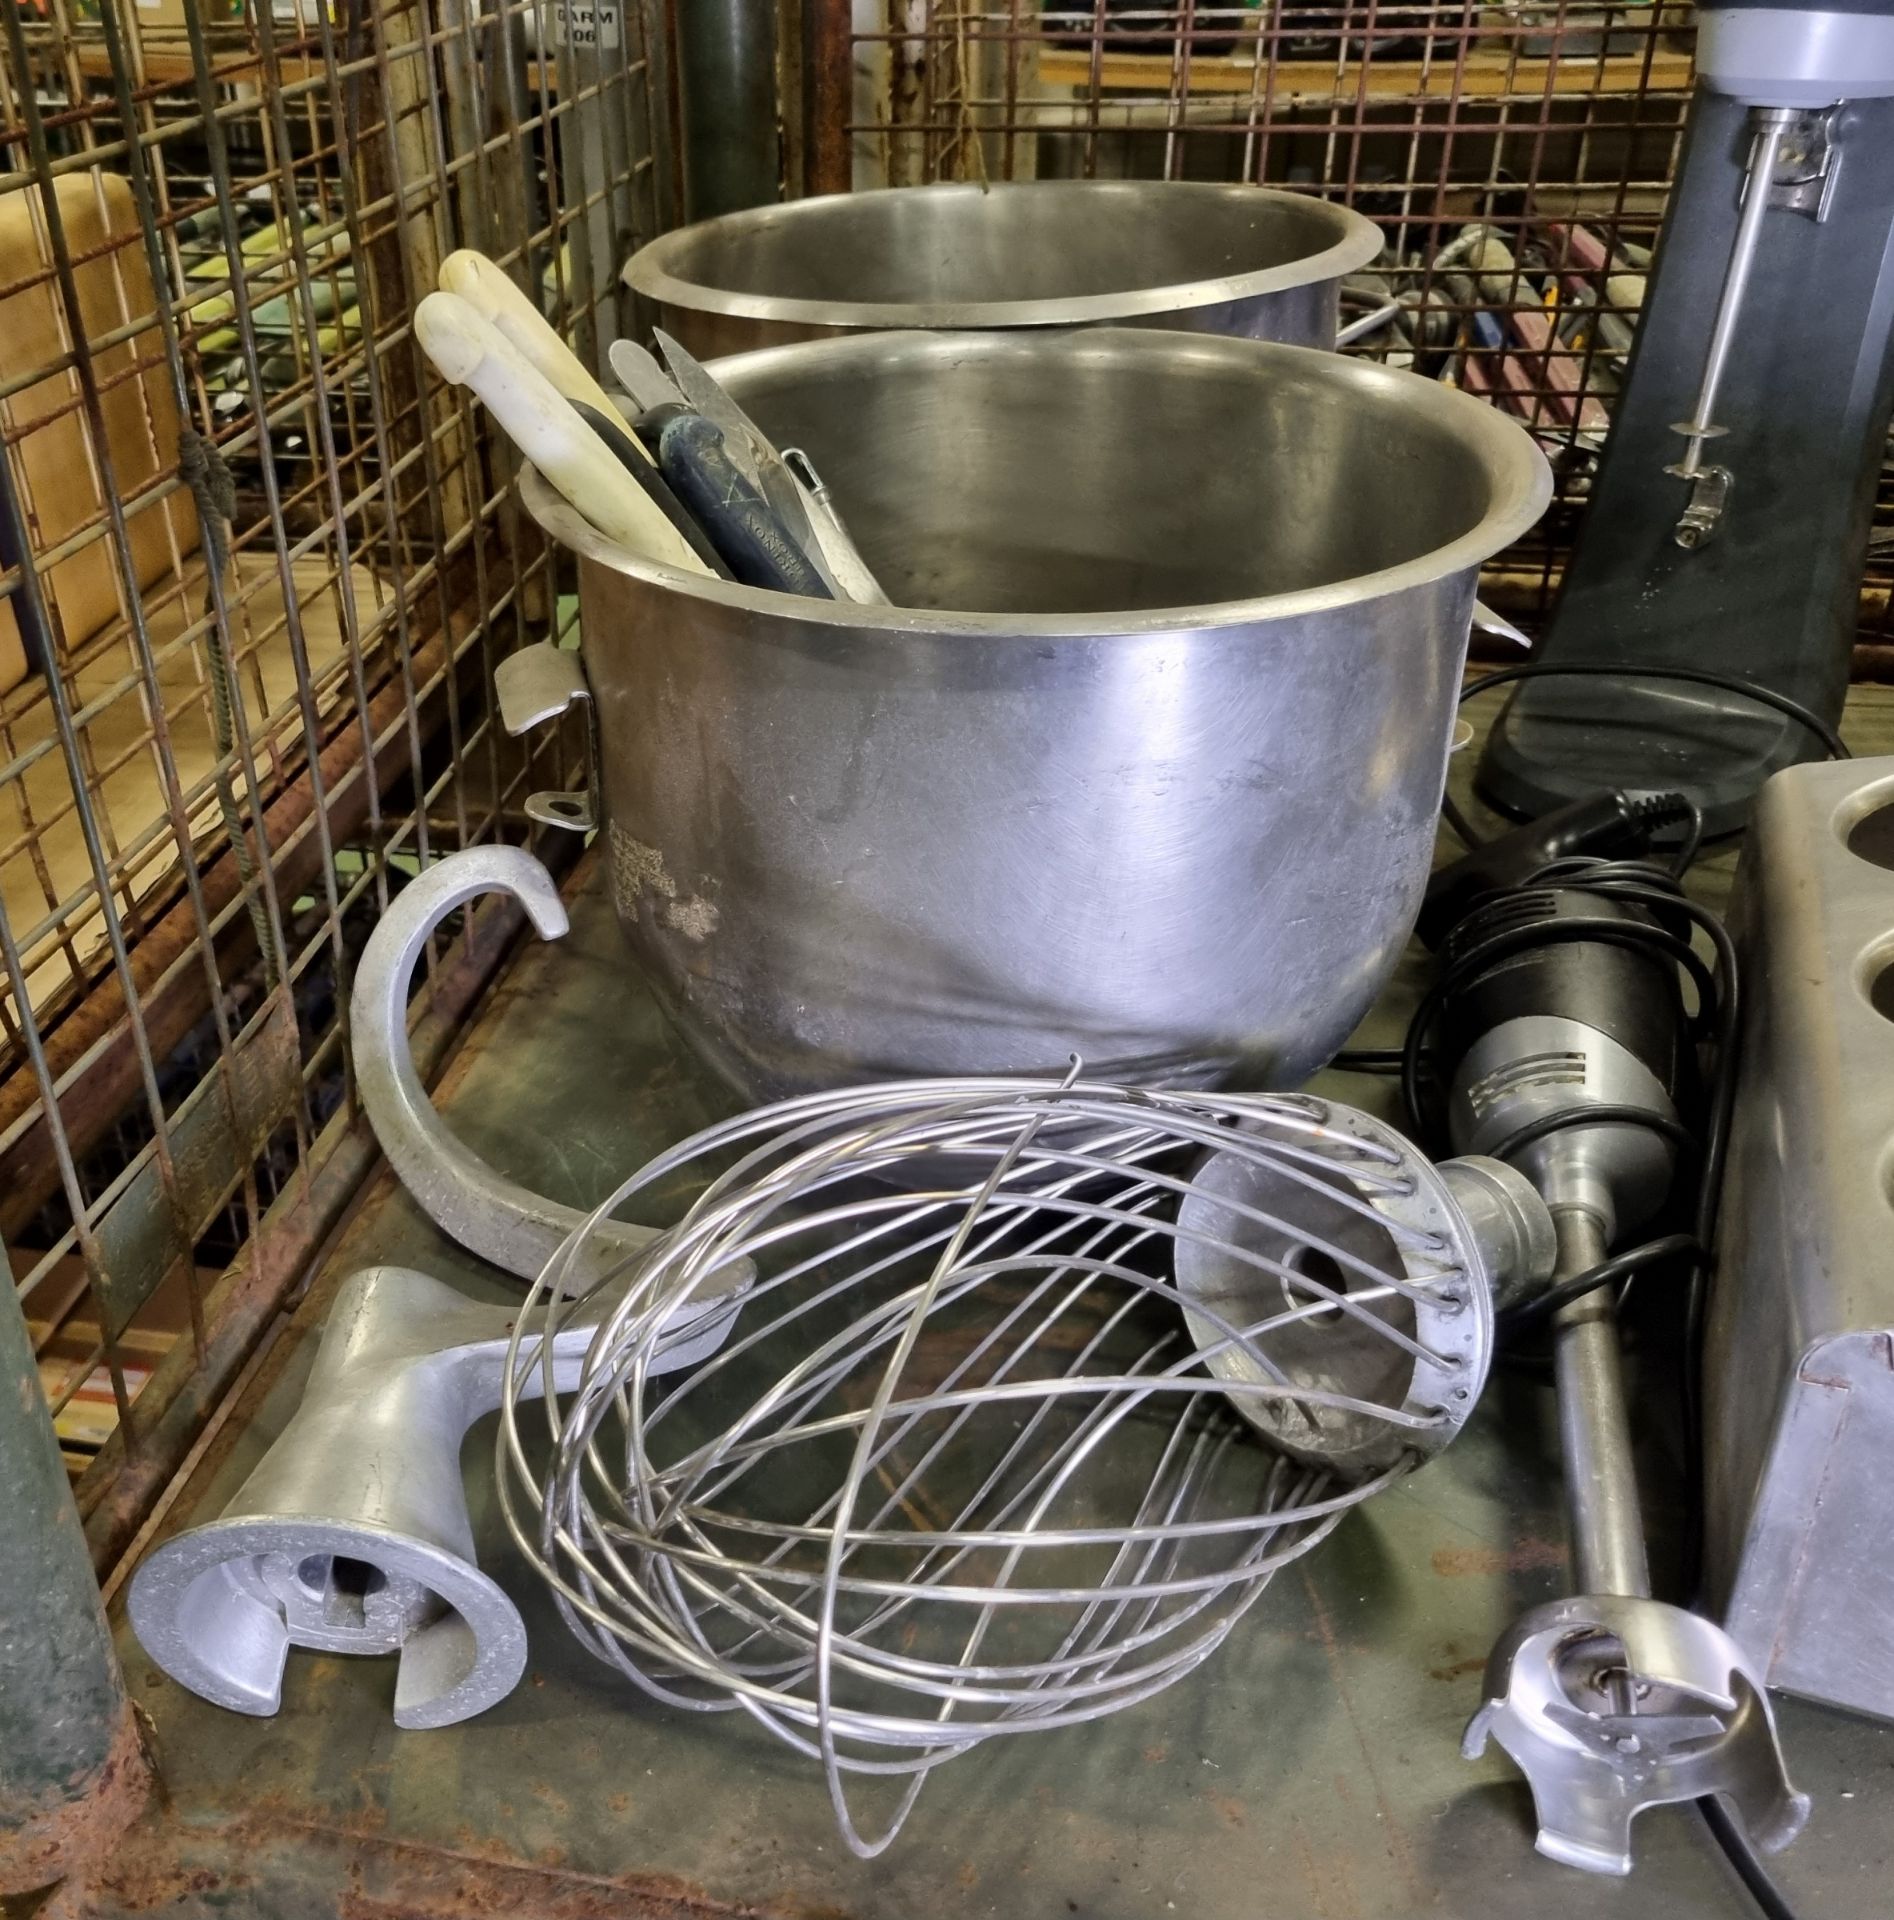 Catering equipment - mixing bowls, mixing attachments, milkshake machines and gastronorm pan lids - Image 4 of 6